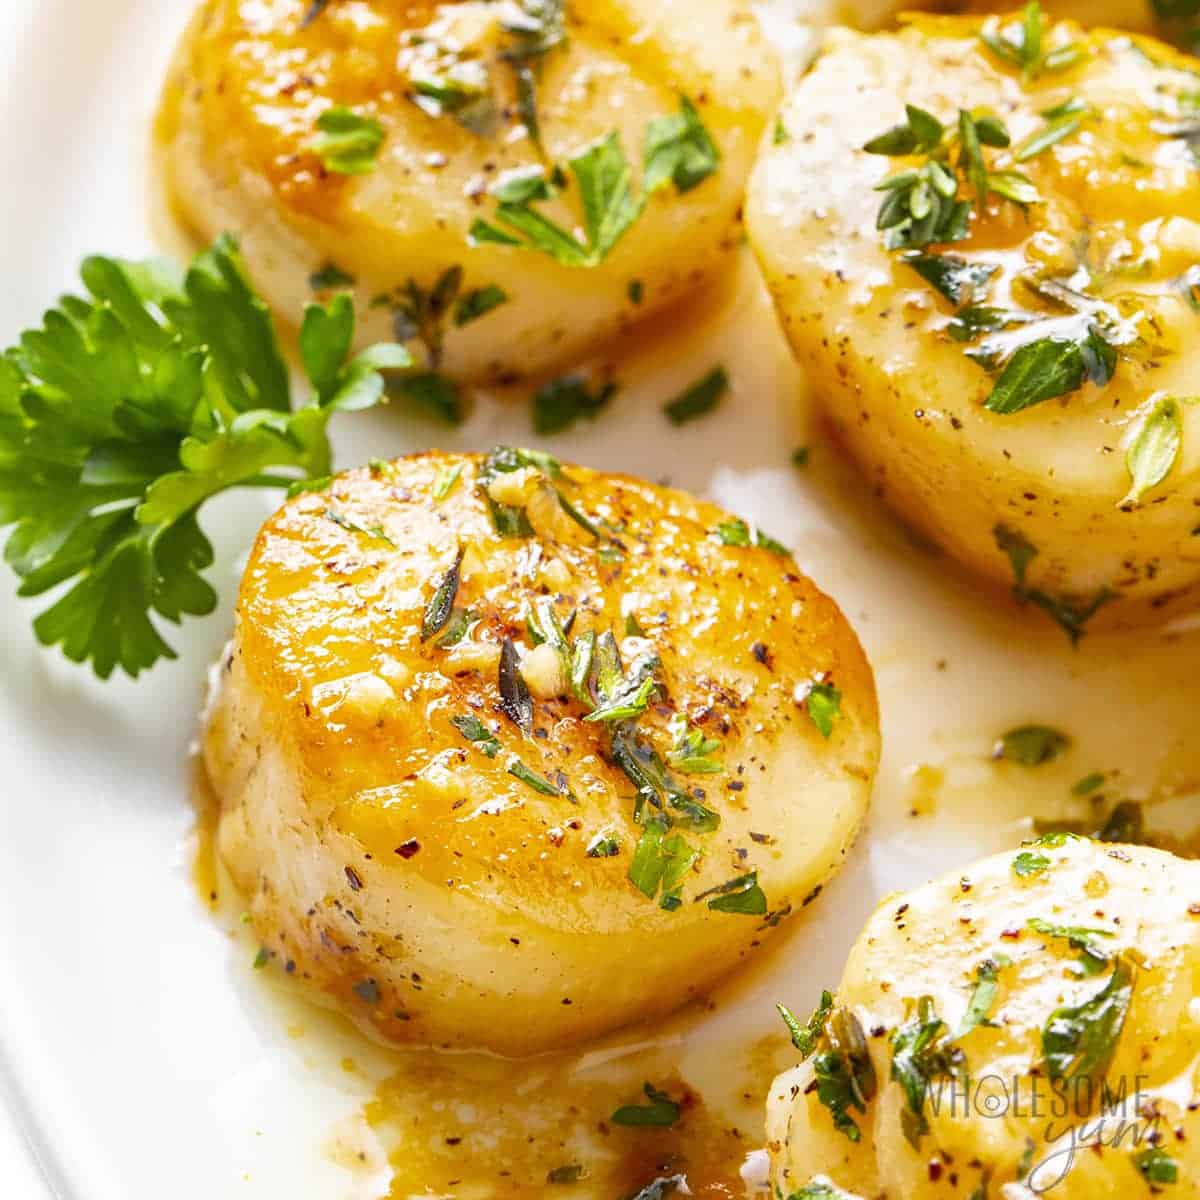 Seared Scallops (With Garlic Butter!) from https://www.wholesomeyum.com/